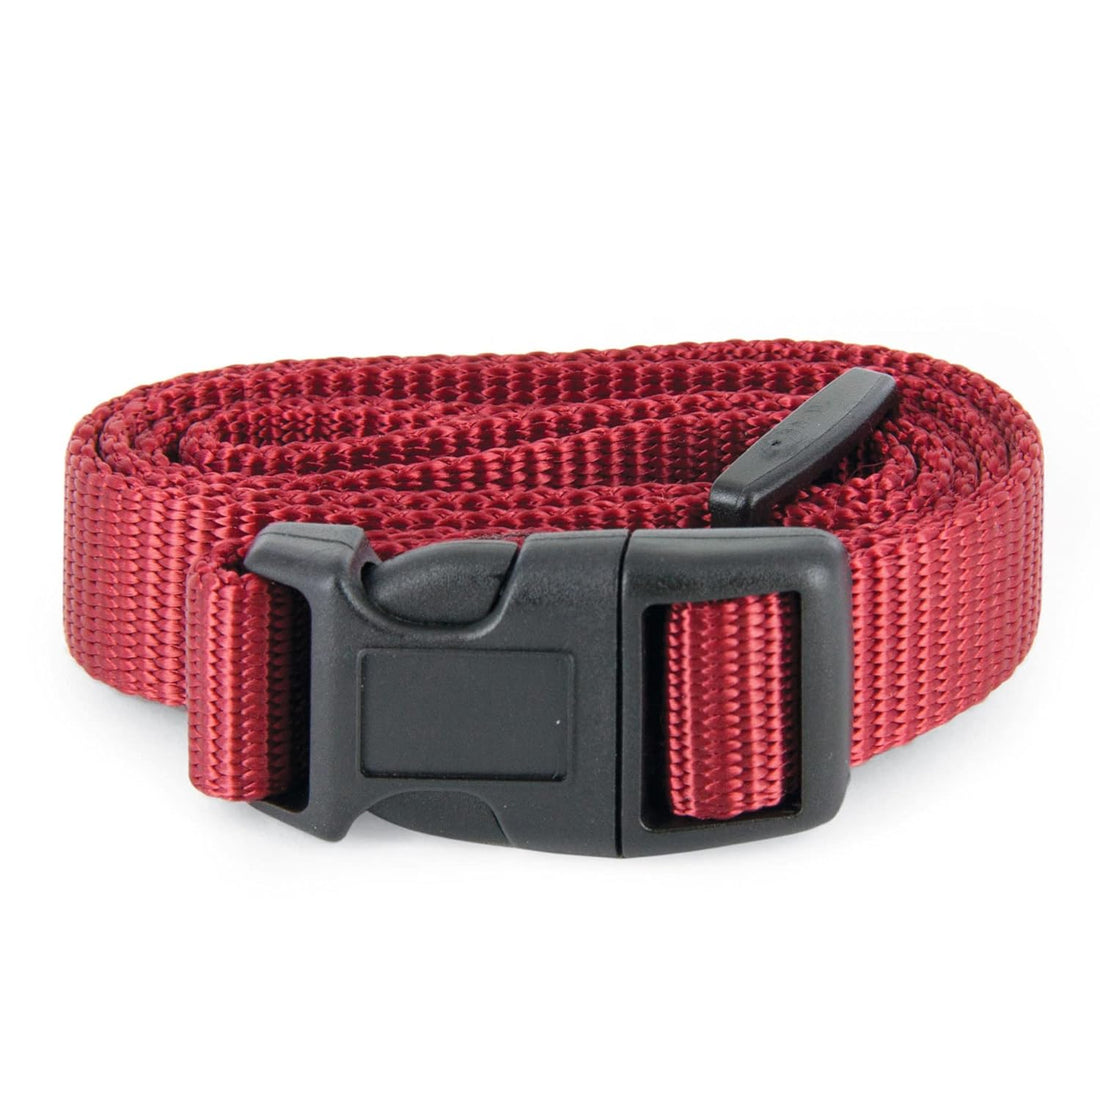 PetSafe 3/4 Replacement Collar Strap with no Holes Bark, Wireless Fence, In-Ground Fence and Pawz Away Collars - Rust/Red